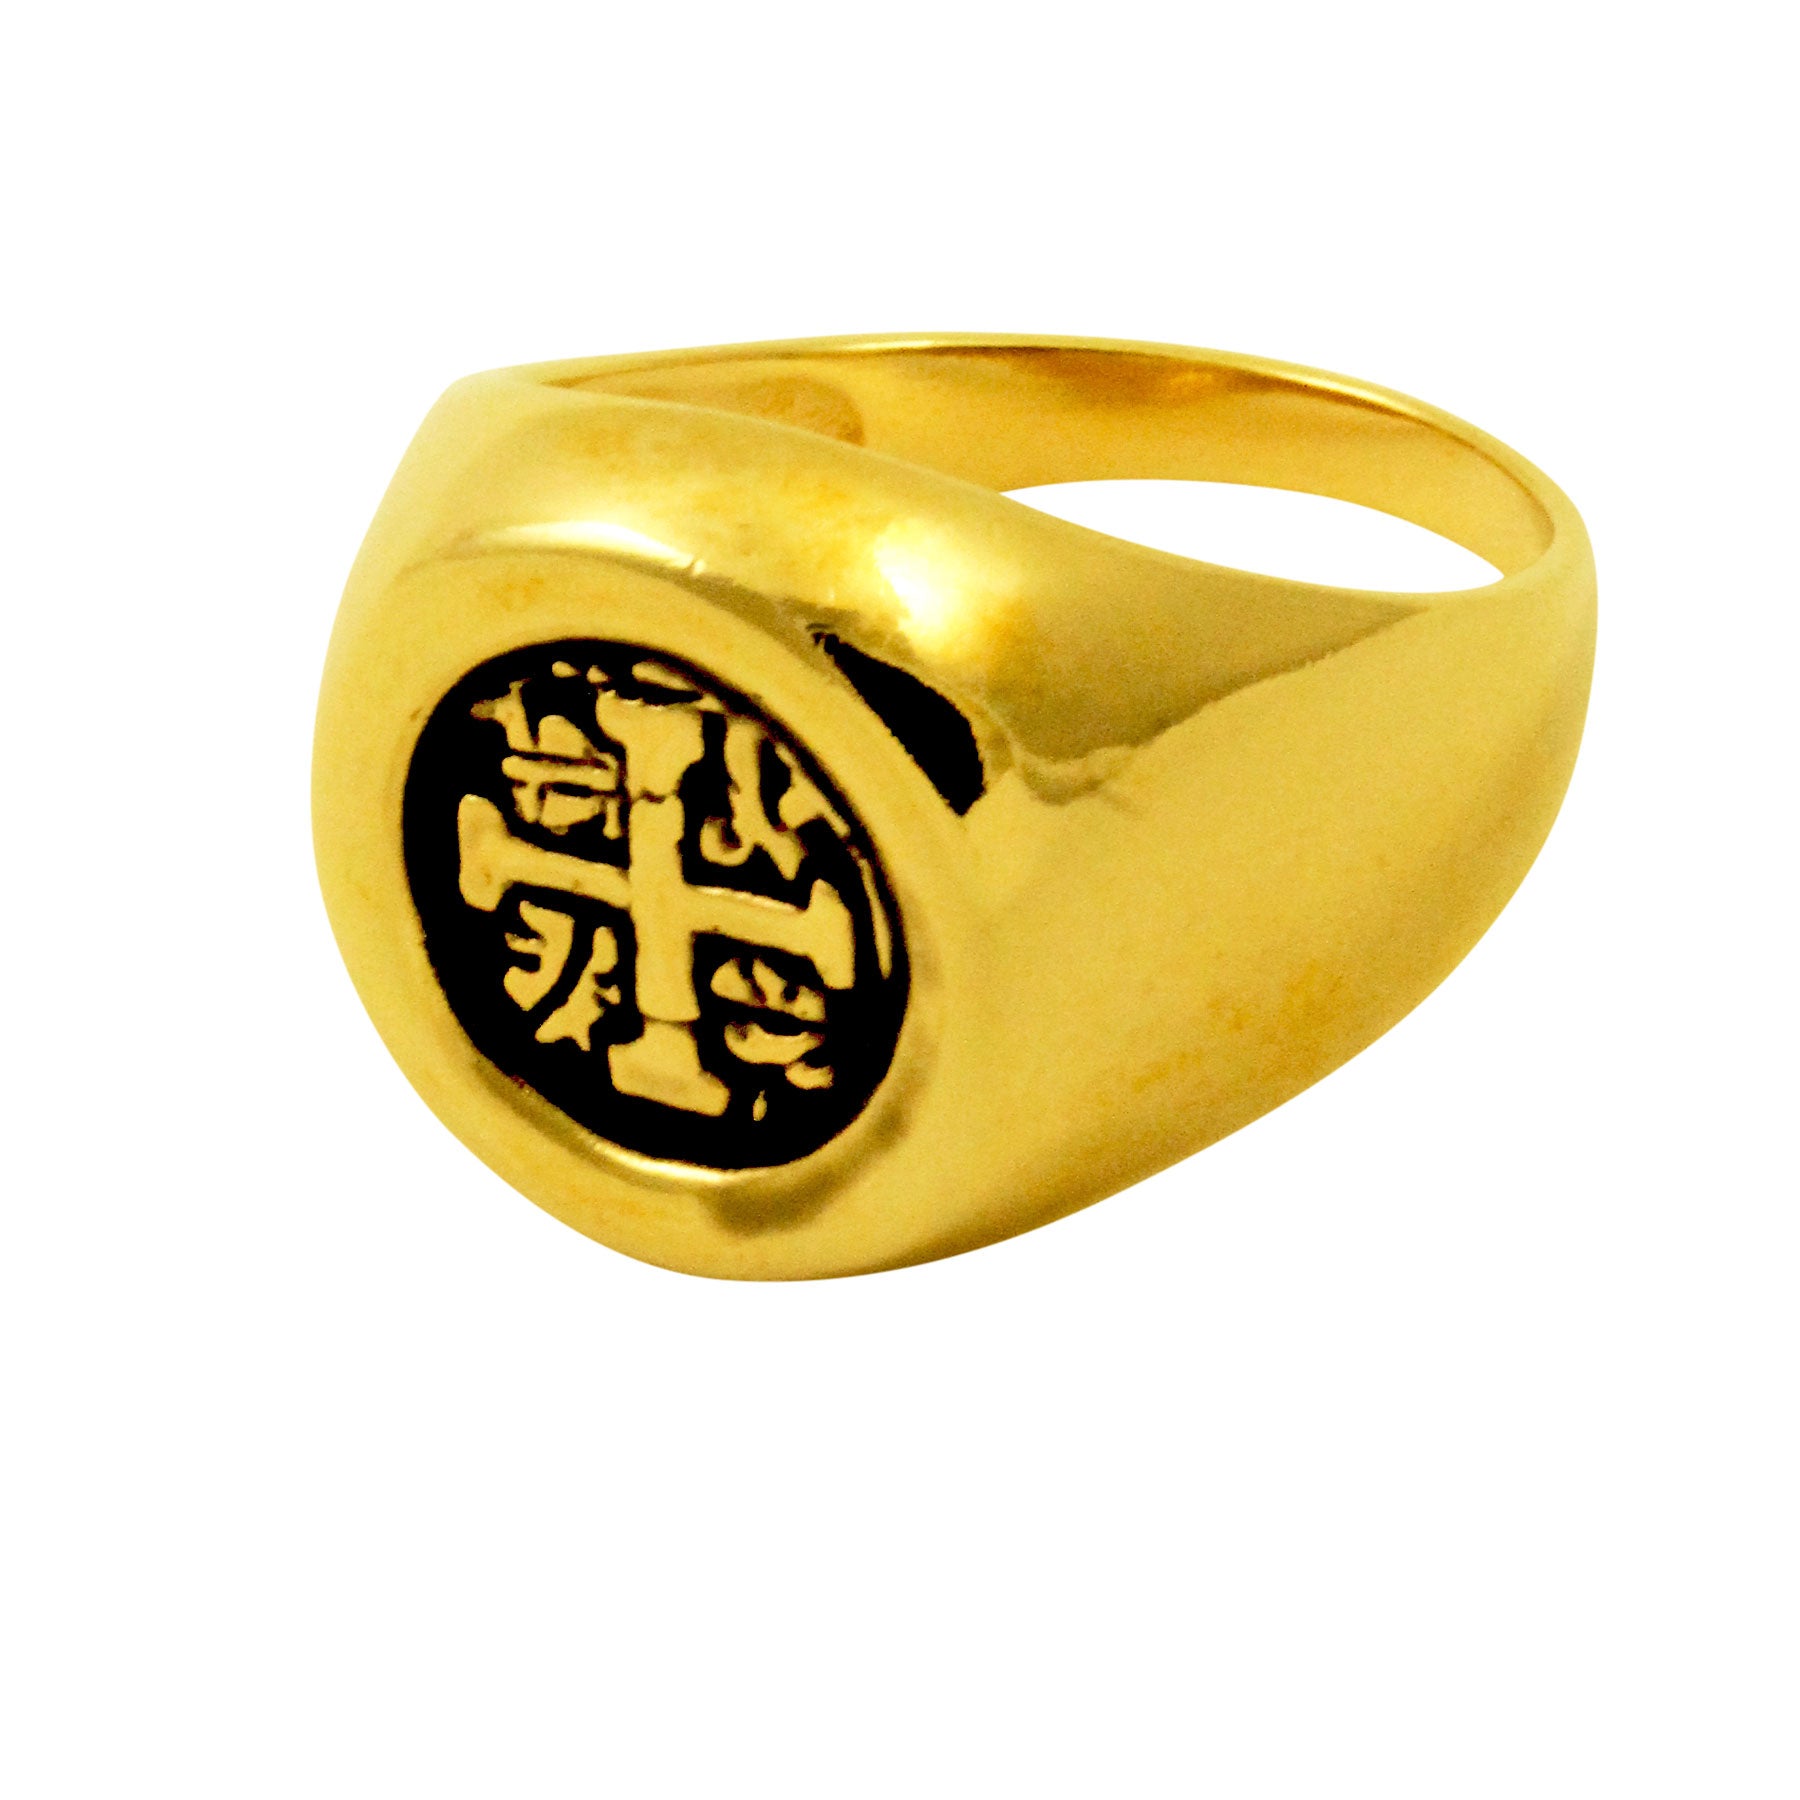 Goldtone "Macacos" Vintage Spanish Signet Coin Ring